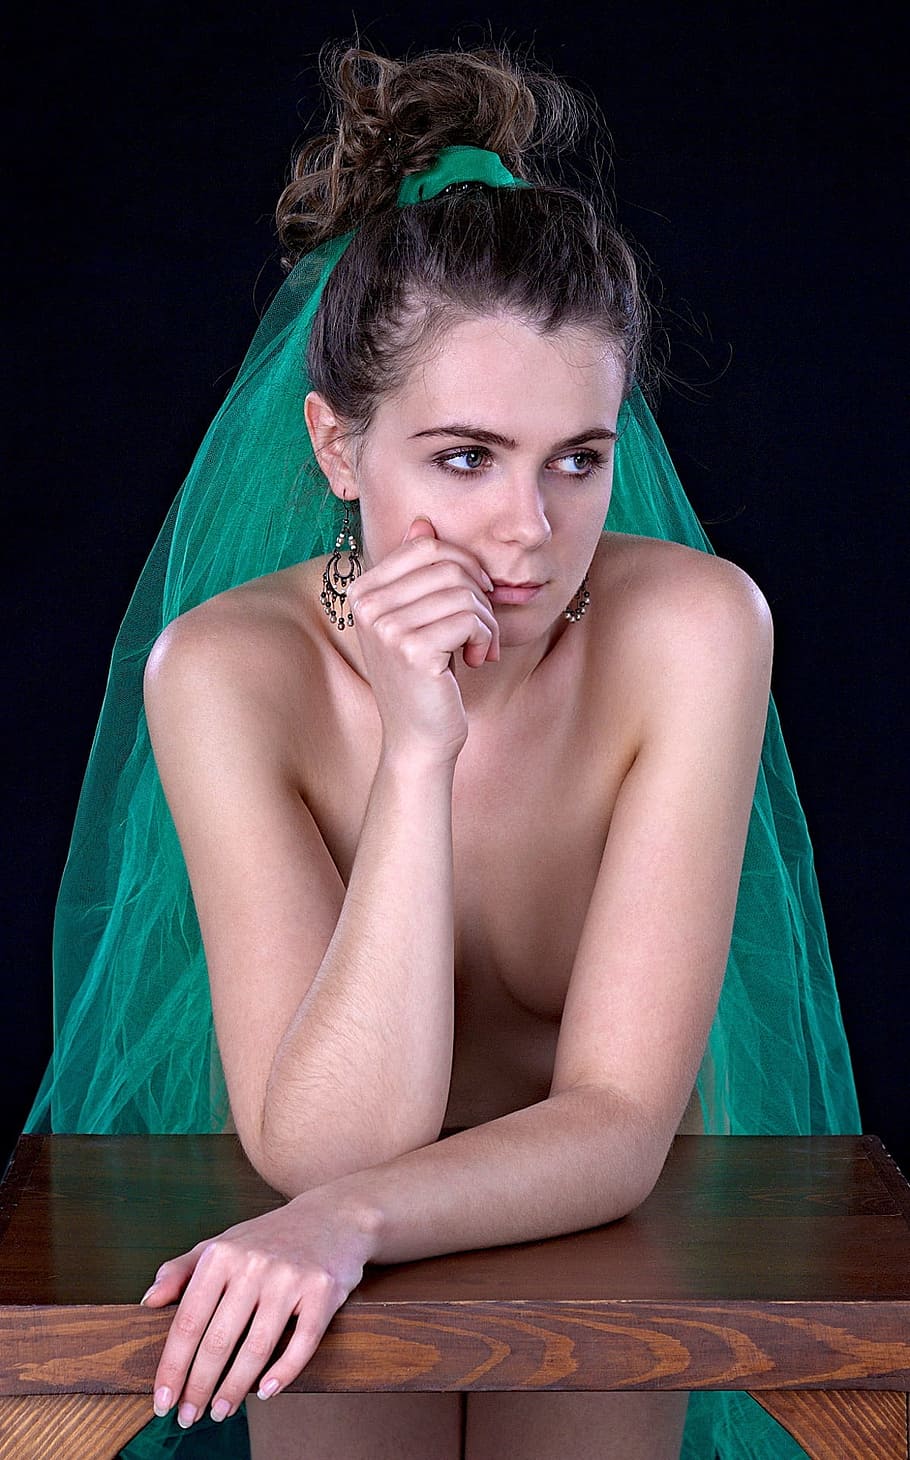 woman, wearing, green, veil, thoughtfulness, girl, portrait, thinking, peace of mind, contemplation